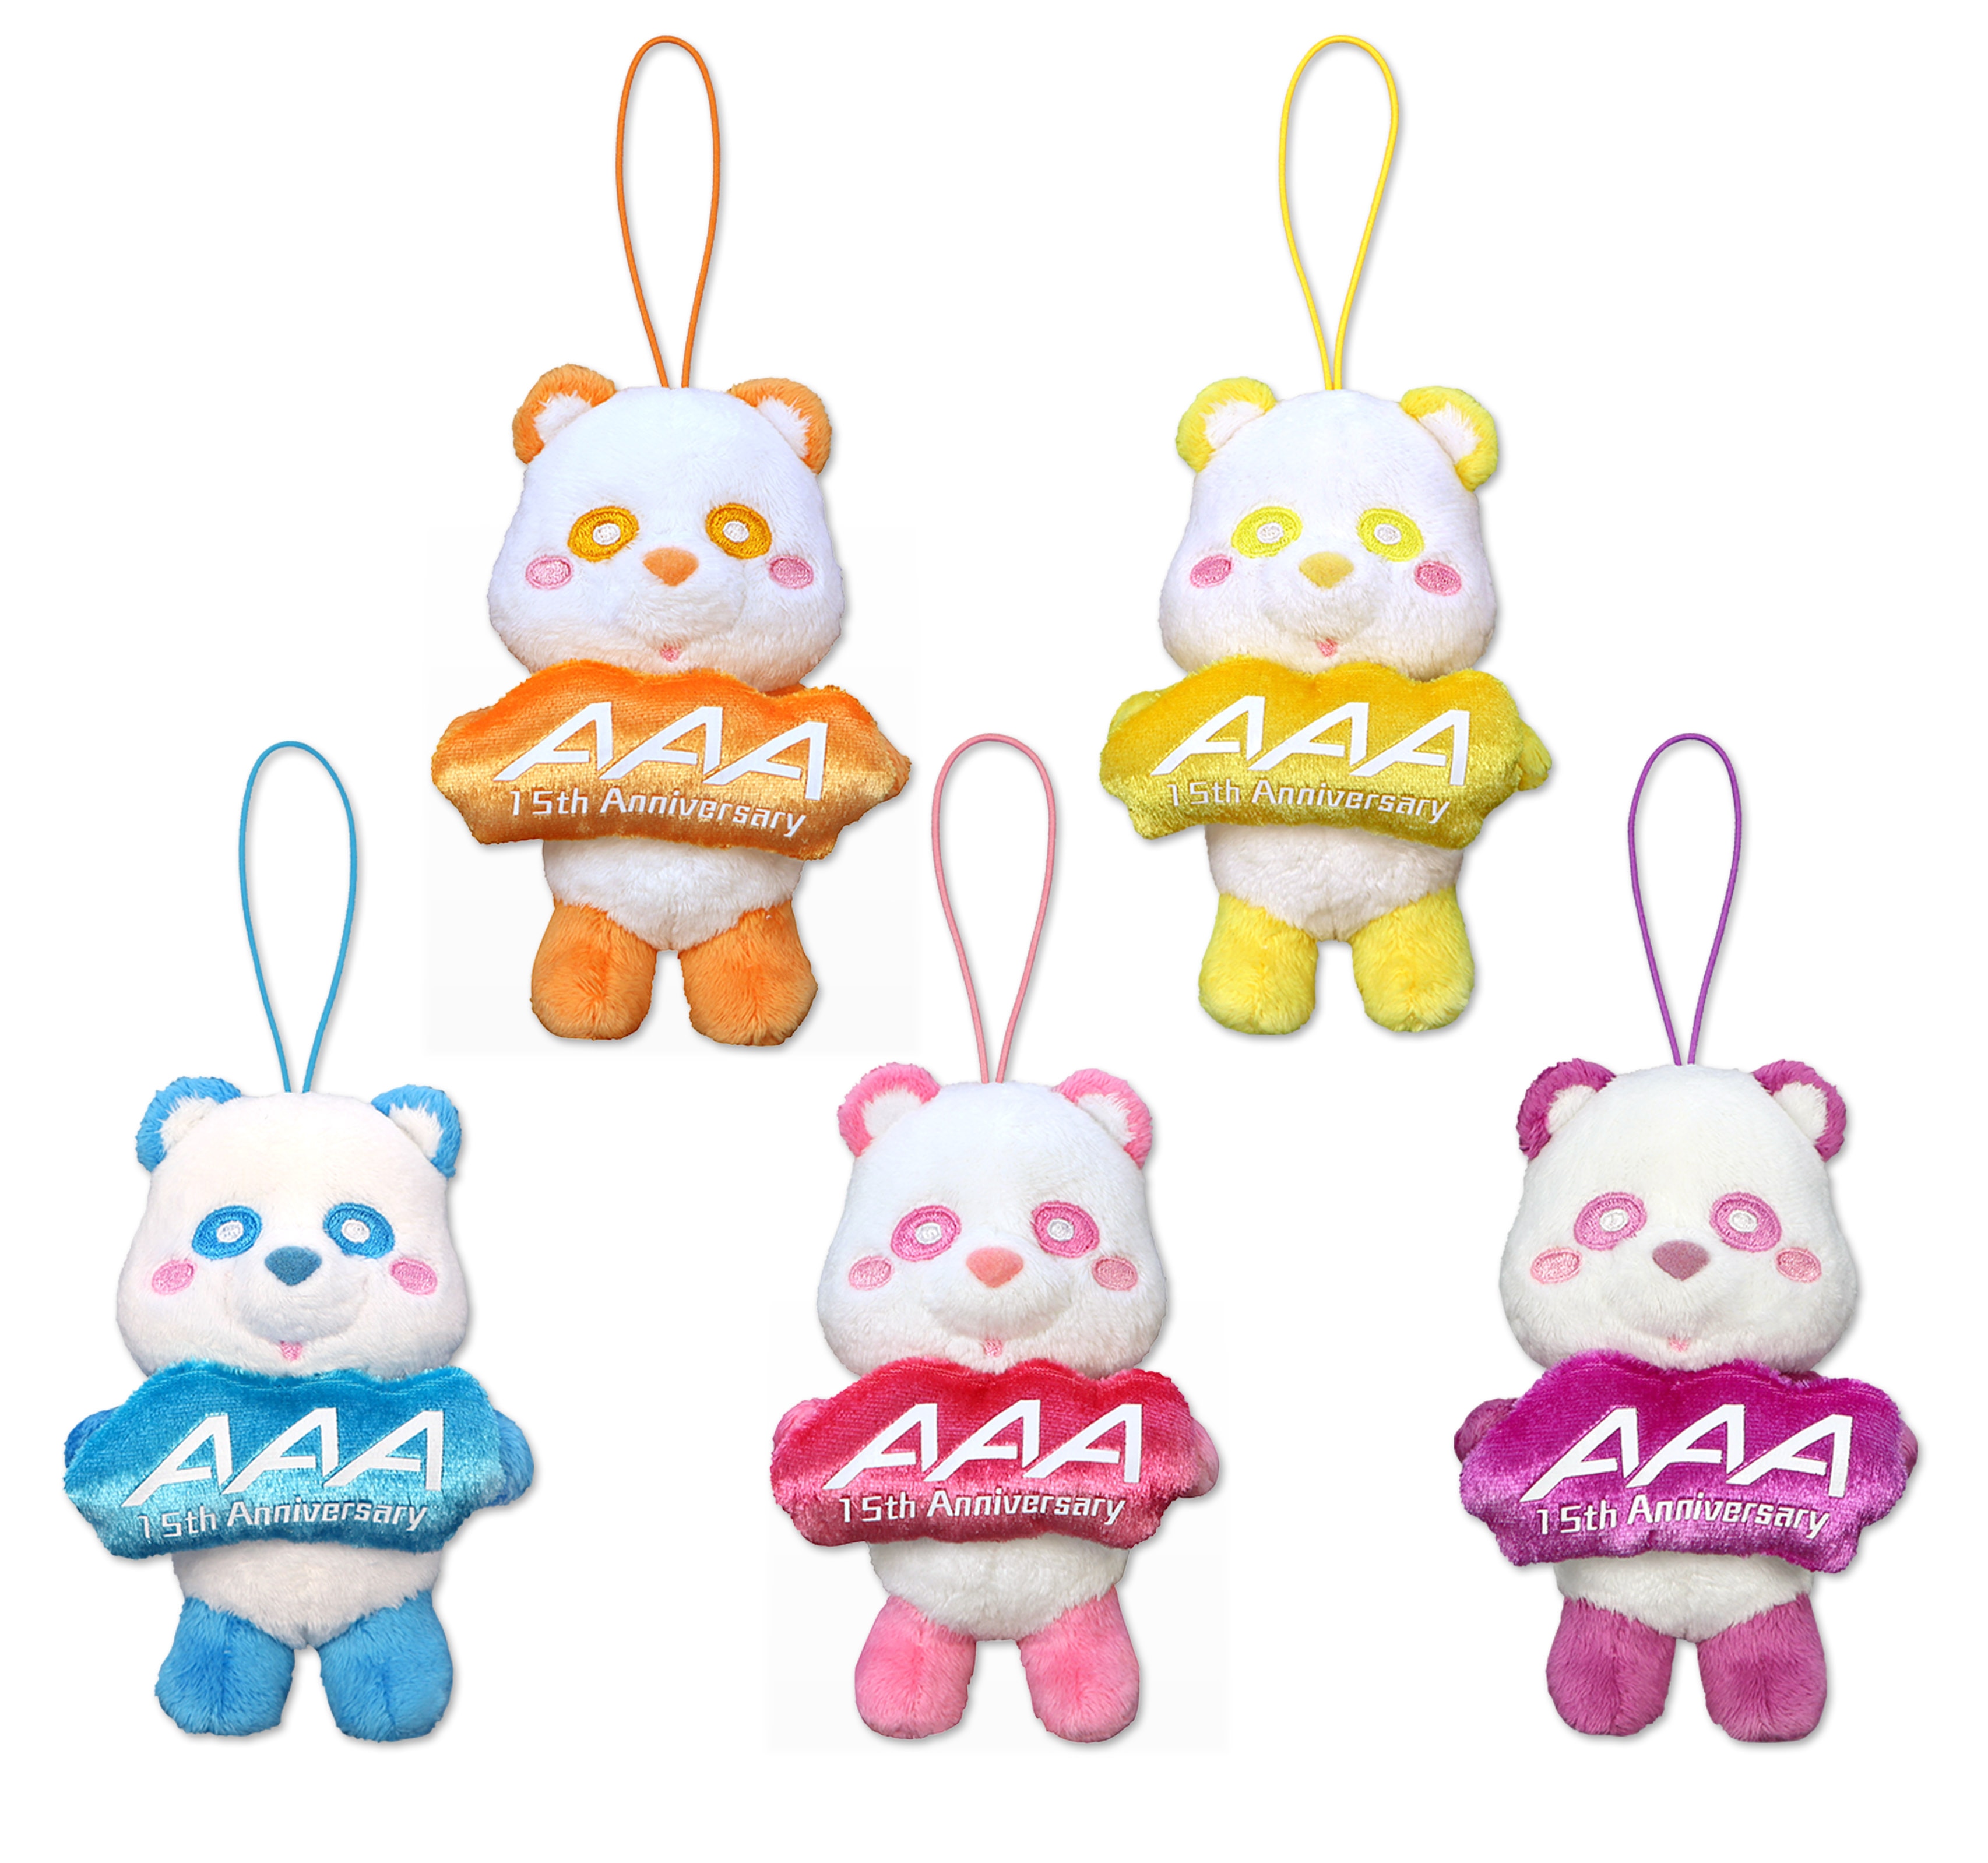 GOODS | AAA（トリプル・エー）OFFICIAL WEBSITE